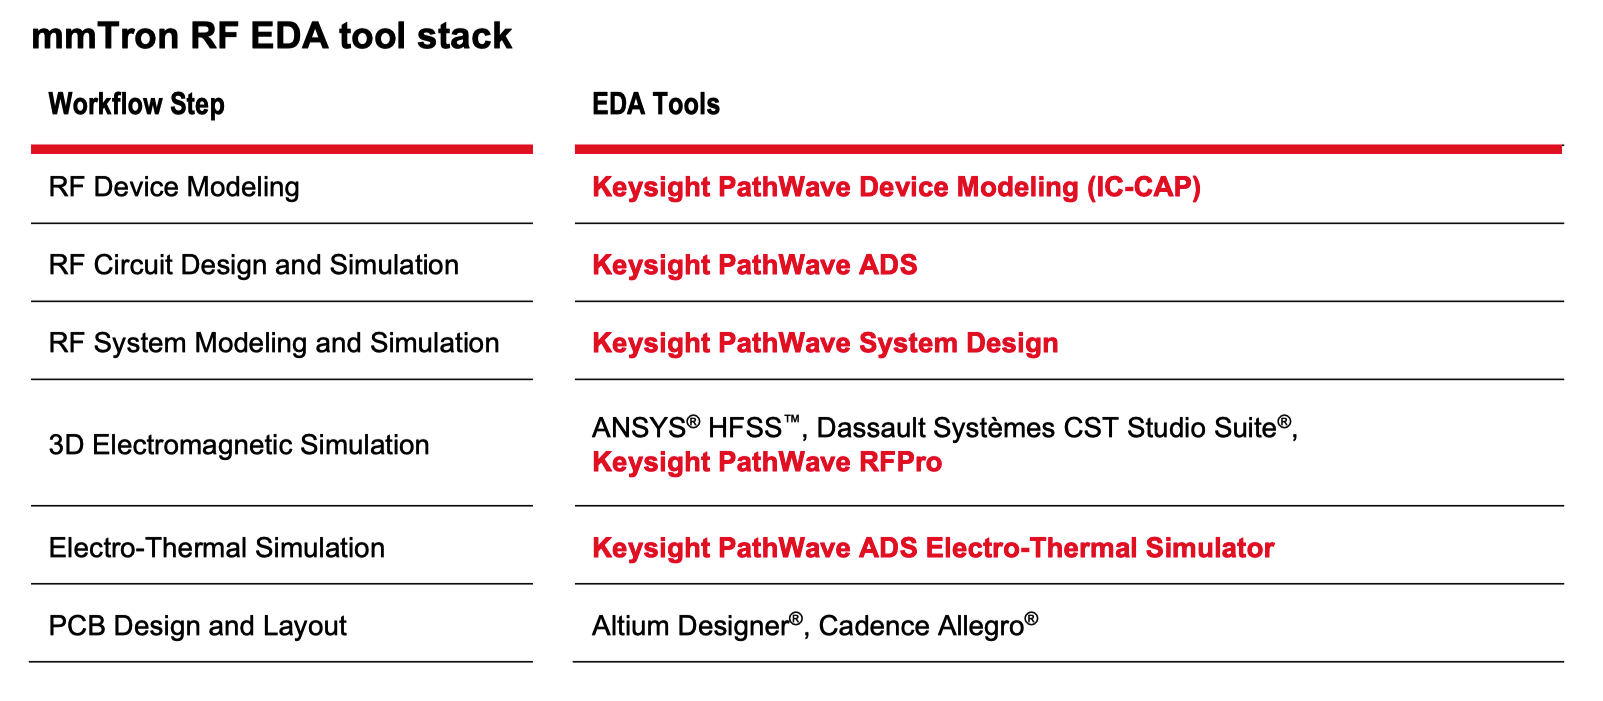 Listing of Keysight EDA tools used my mmTron in the design of the TMC211